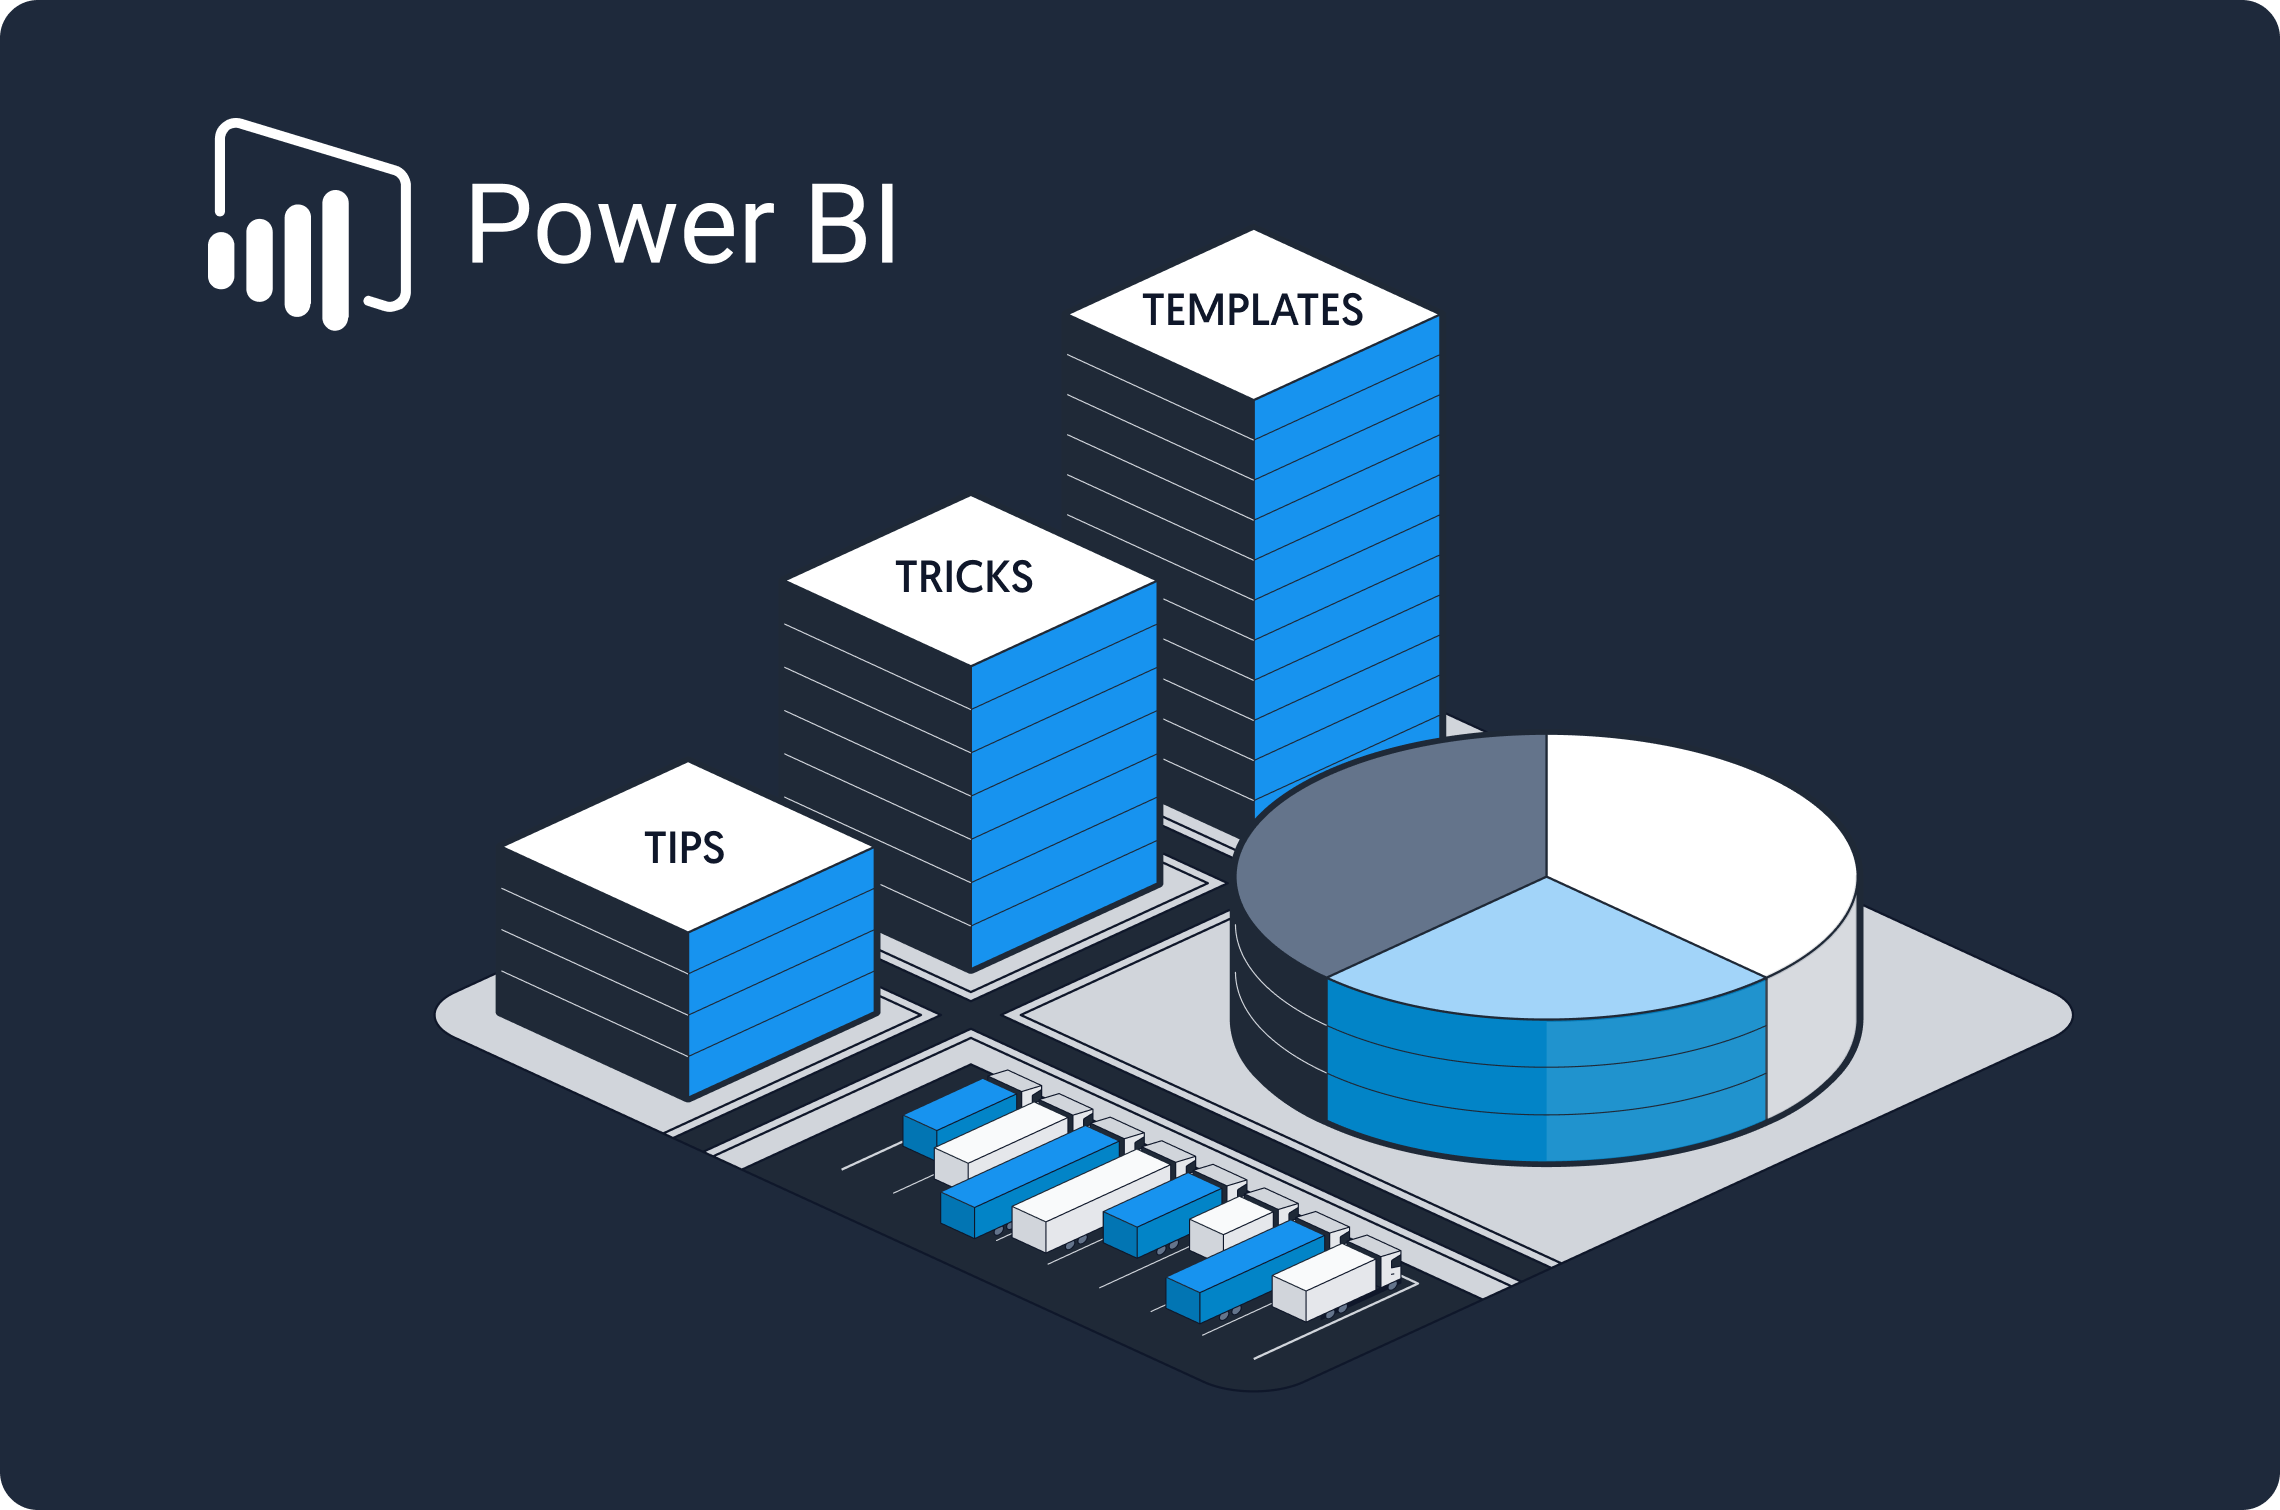 Expert Tips, Tricks, and Templates for Power BI